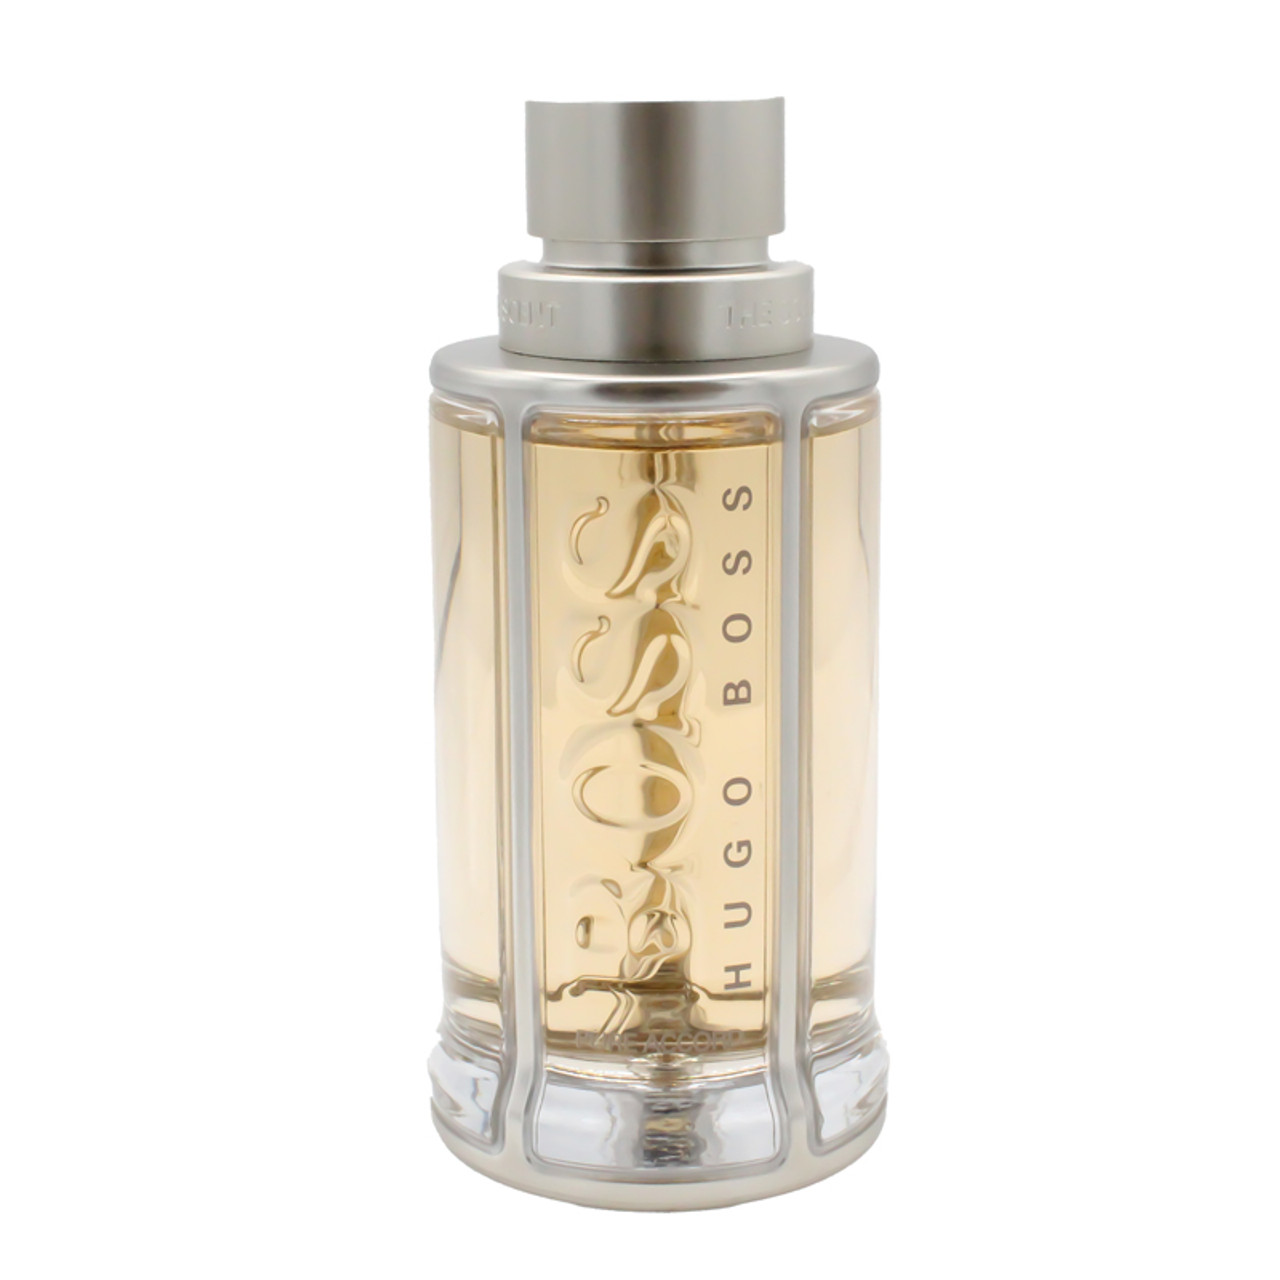 Hugo Boss The Scent Pure Accord tester - Profumi Tester Online